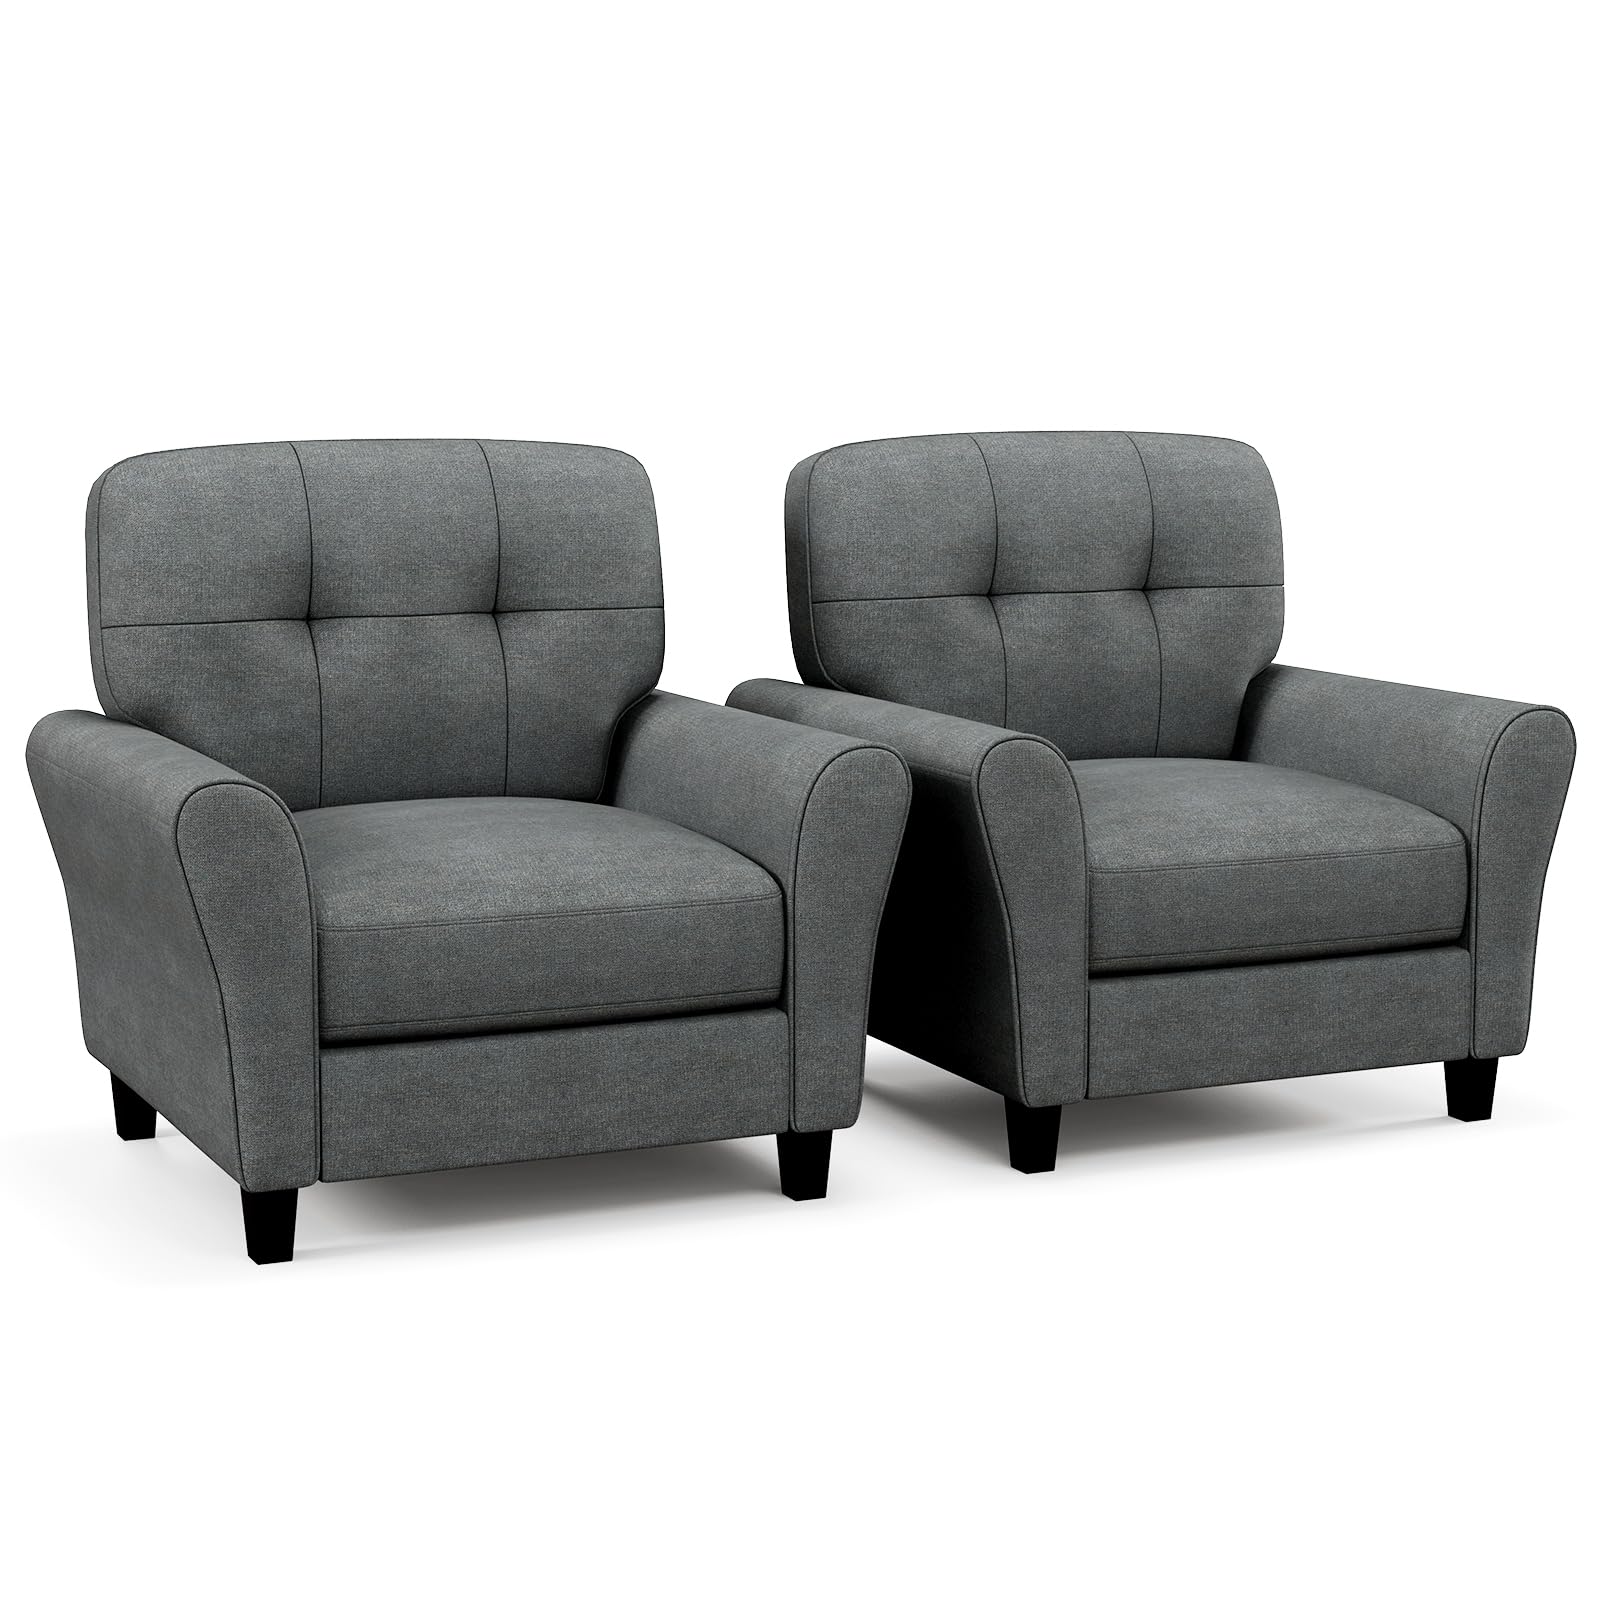 Giantex Modern Mid-Century Accent Chair Set of 2 - Linen Living Room Chair with Tufted Back, Grey